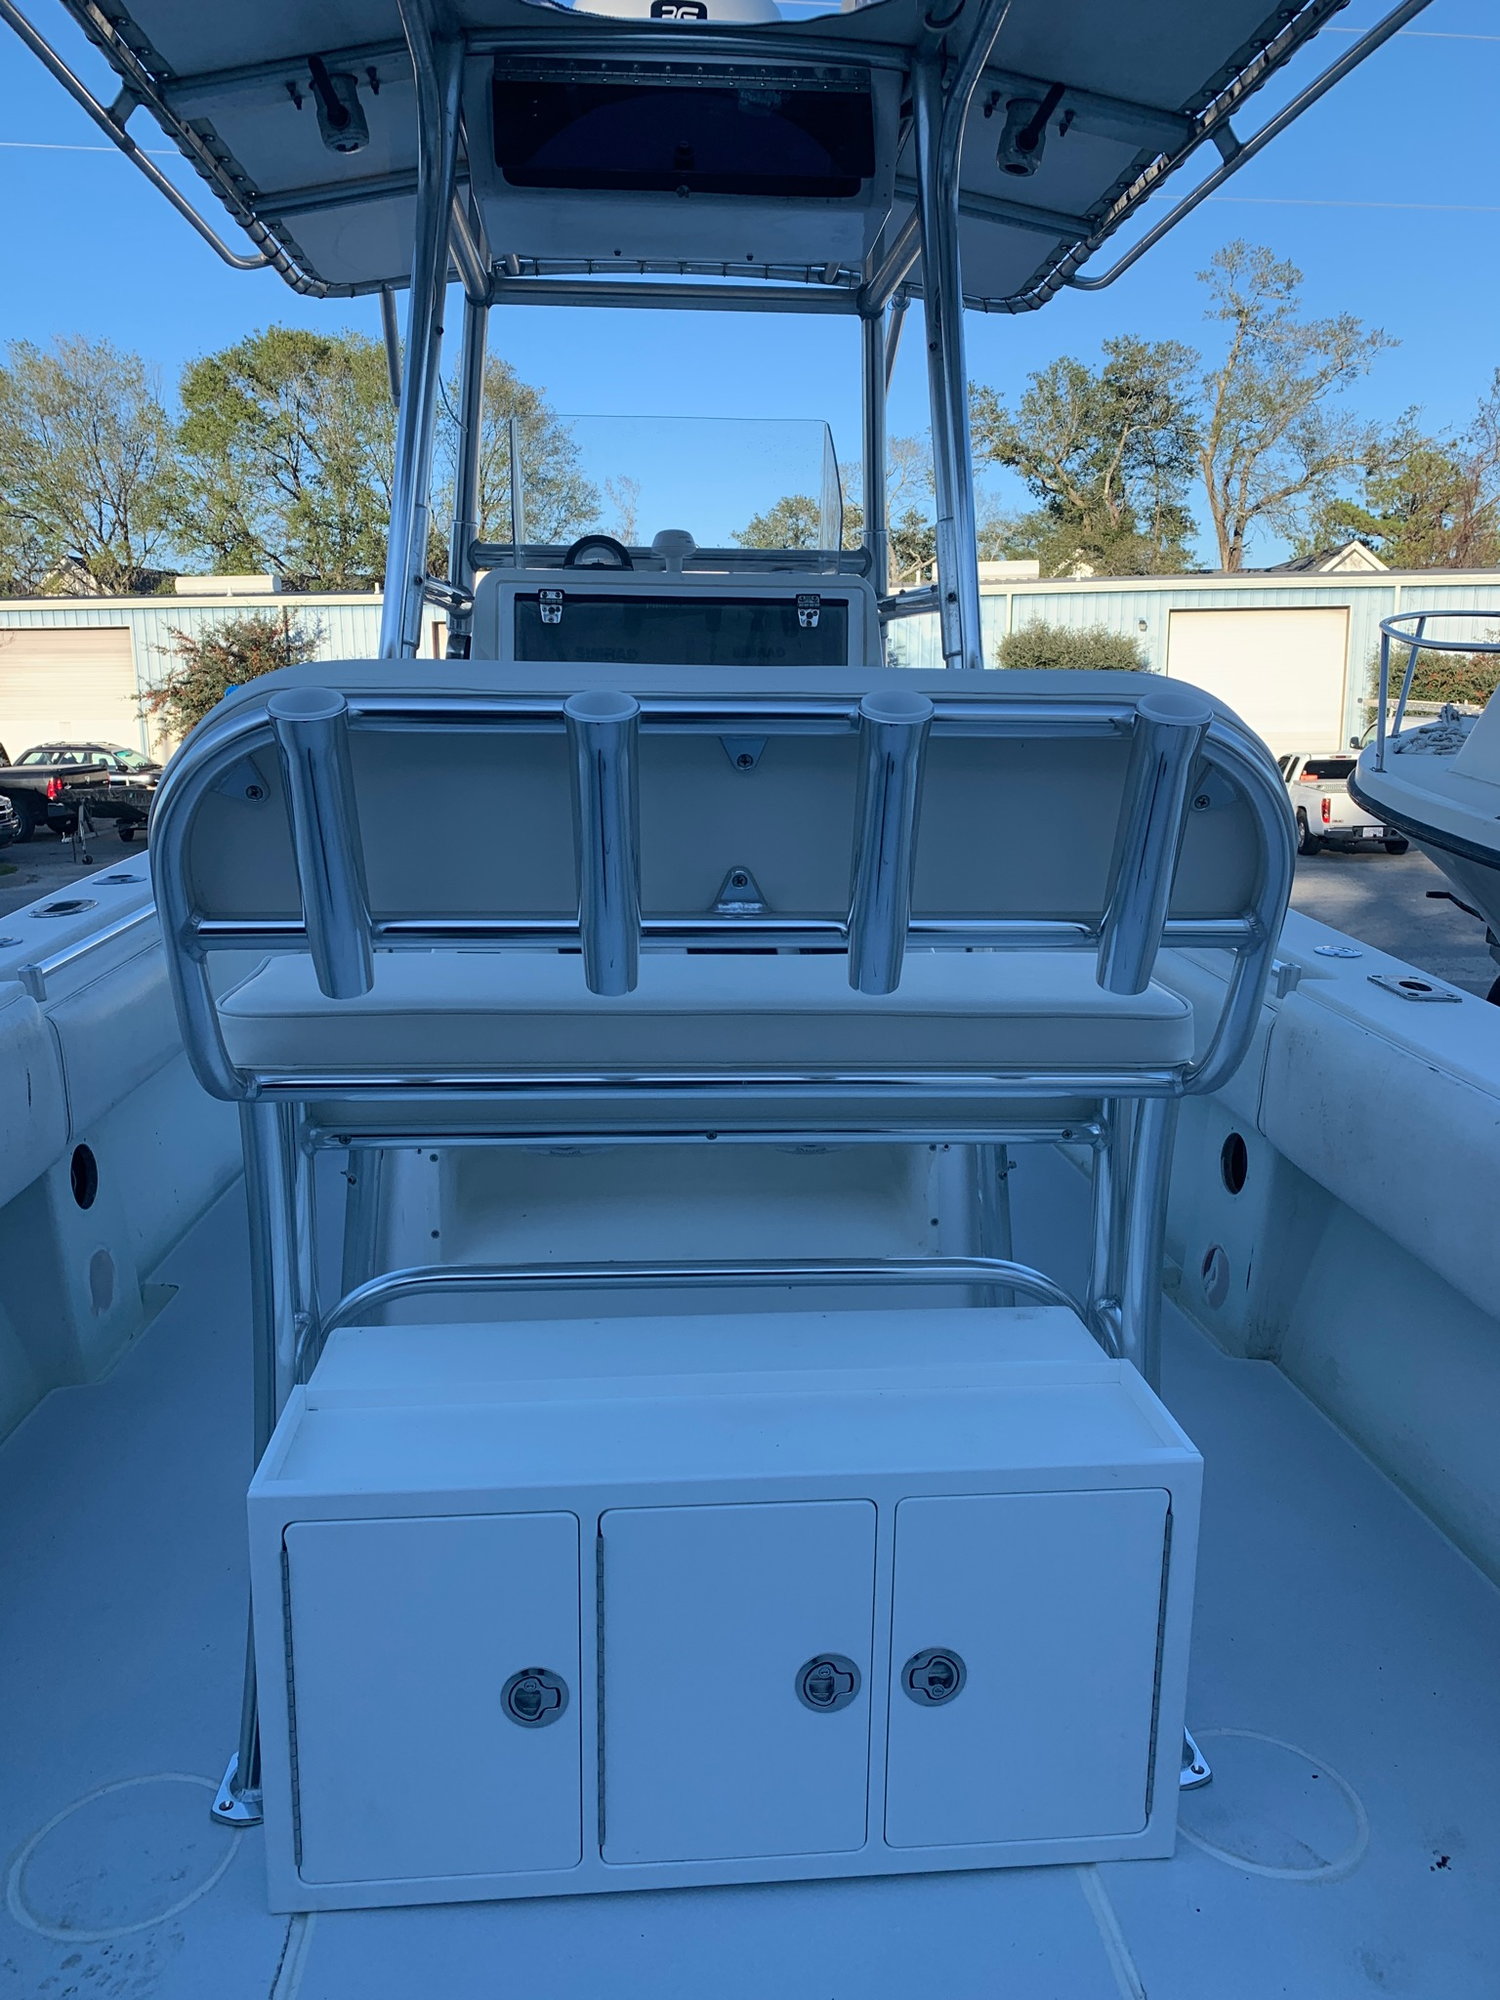 27 Contender transom rod holder - The Hull Truth - Boating and